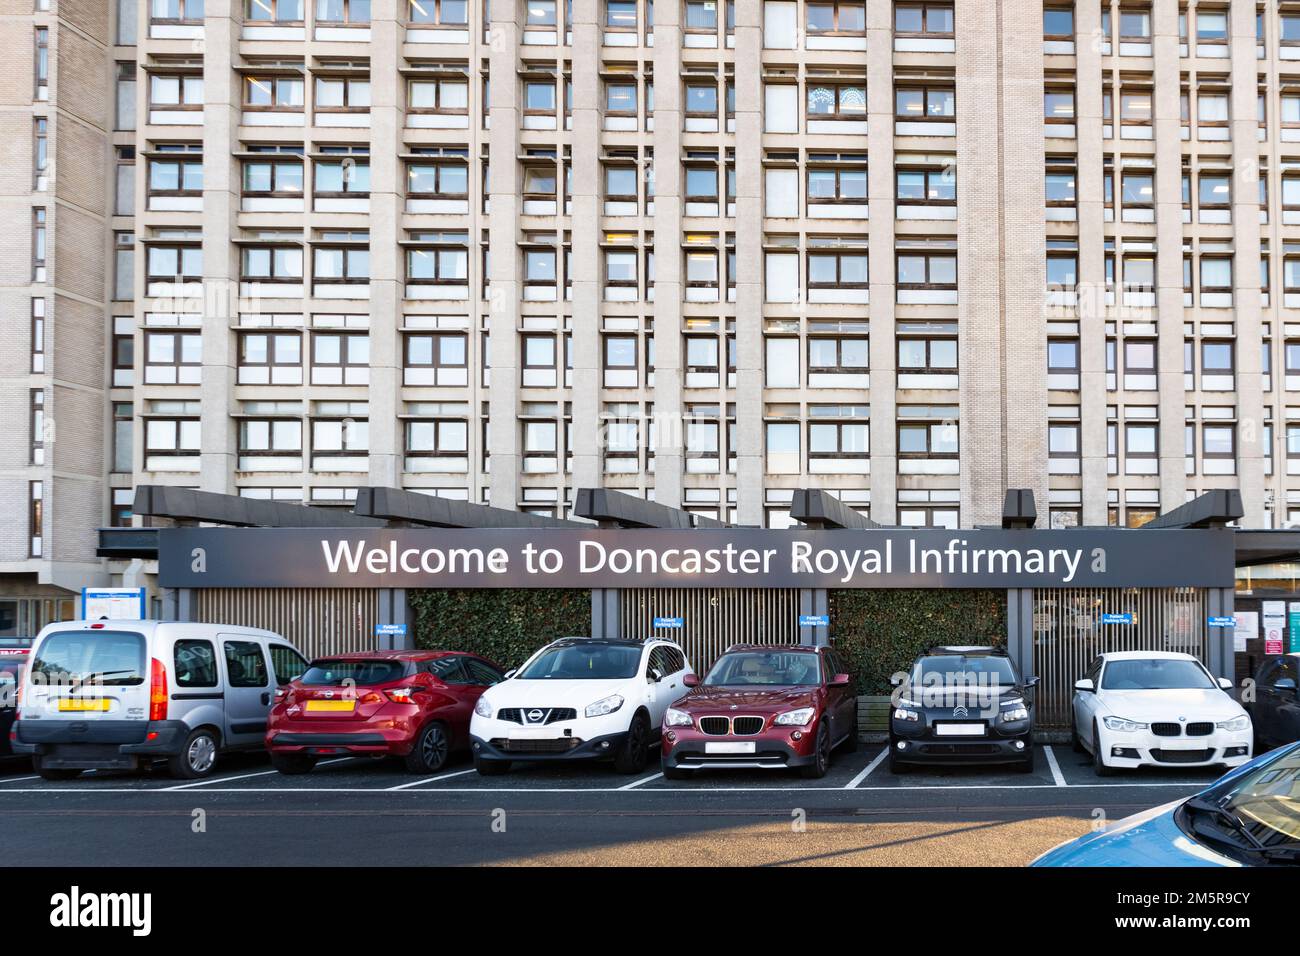 Doncaster Royal Infirmary main entrance, Doncaster, South Yorkshire, England, UK (number plates and faces obscured for privacy) Stock Photo